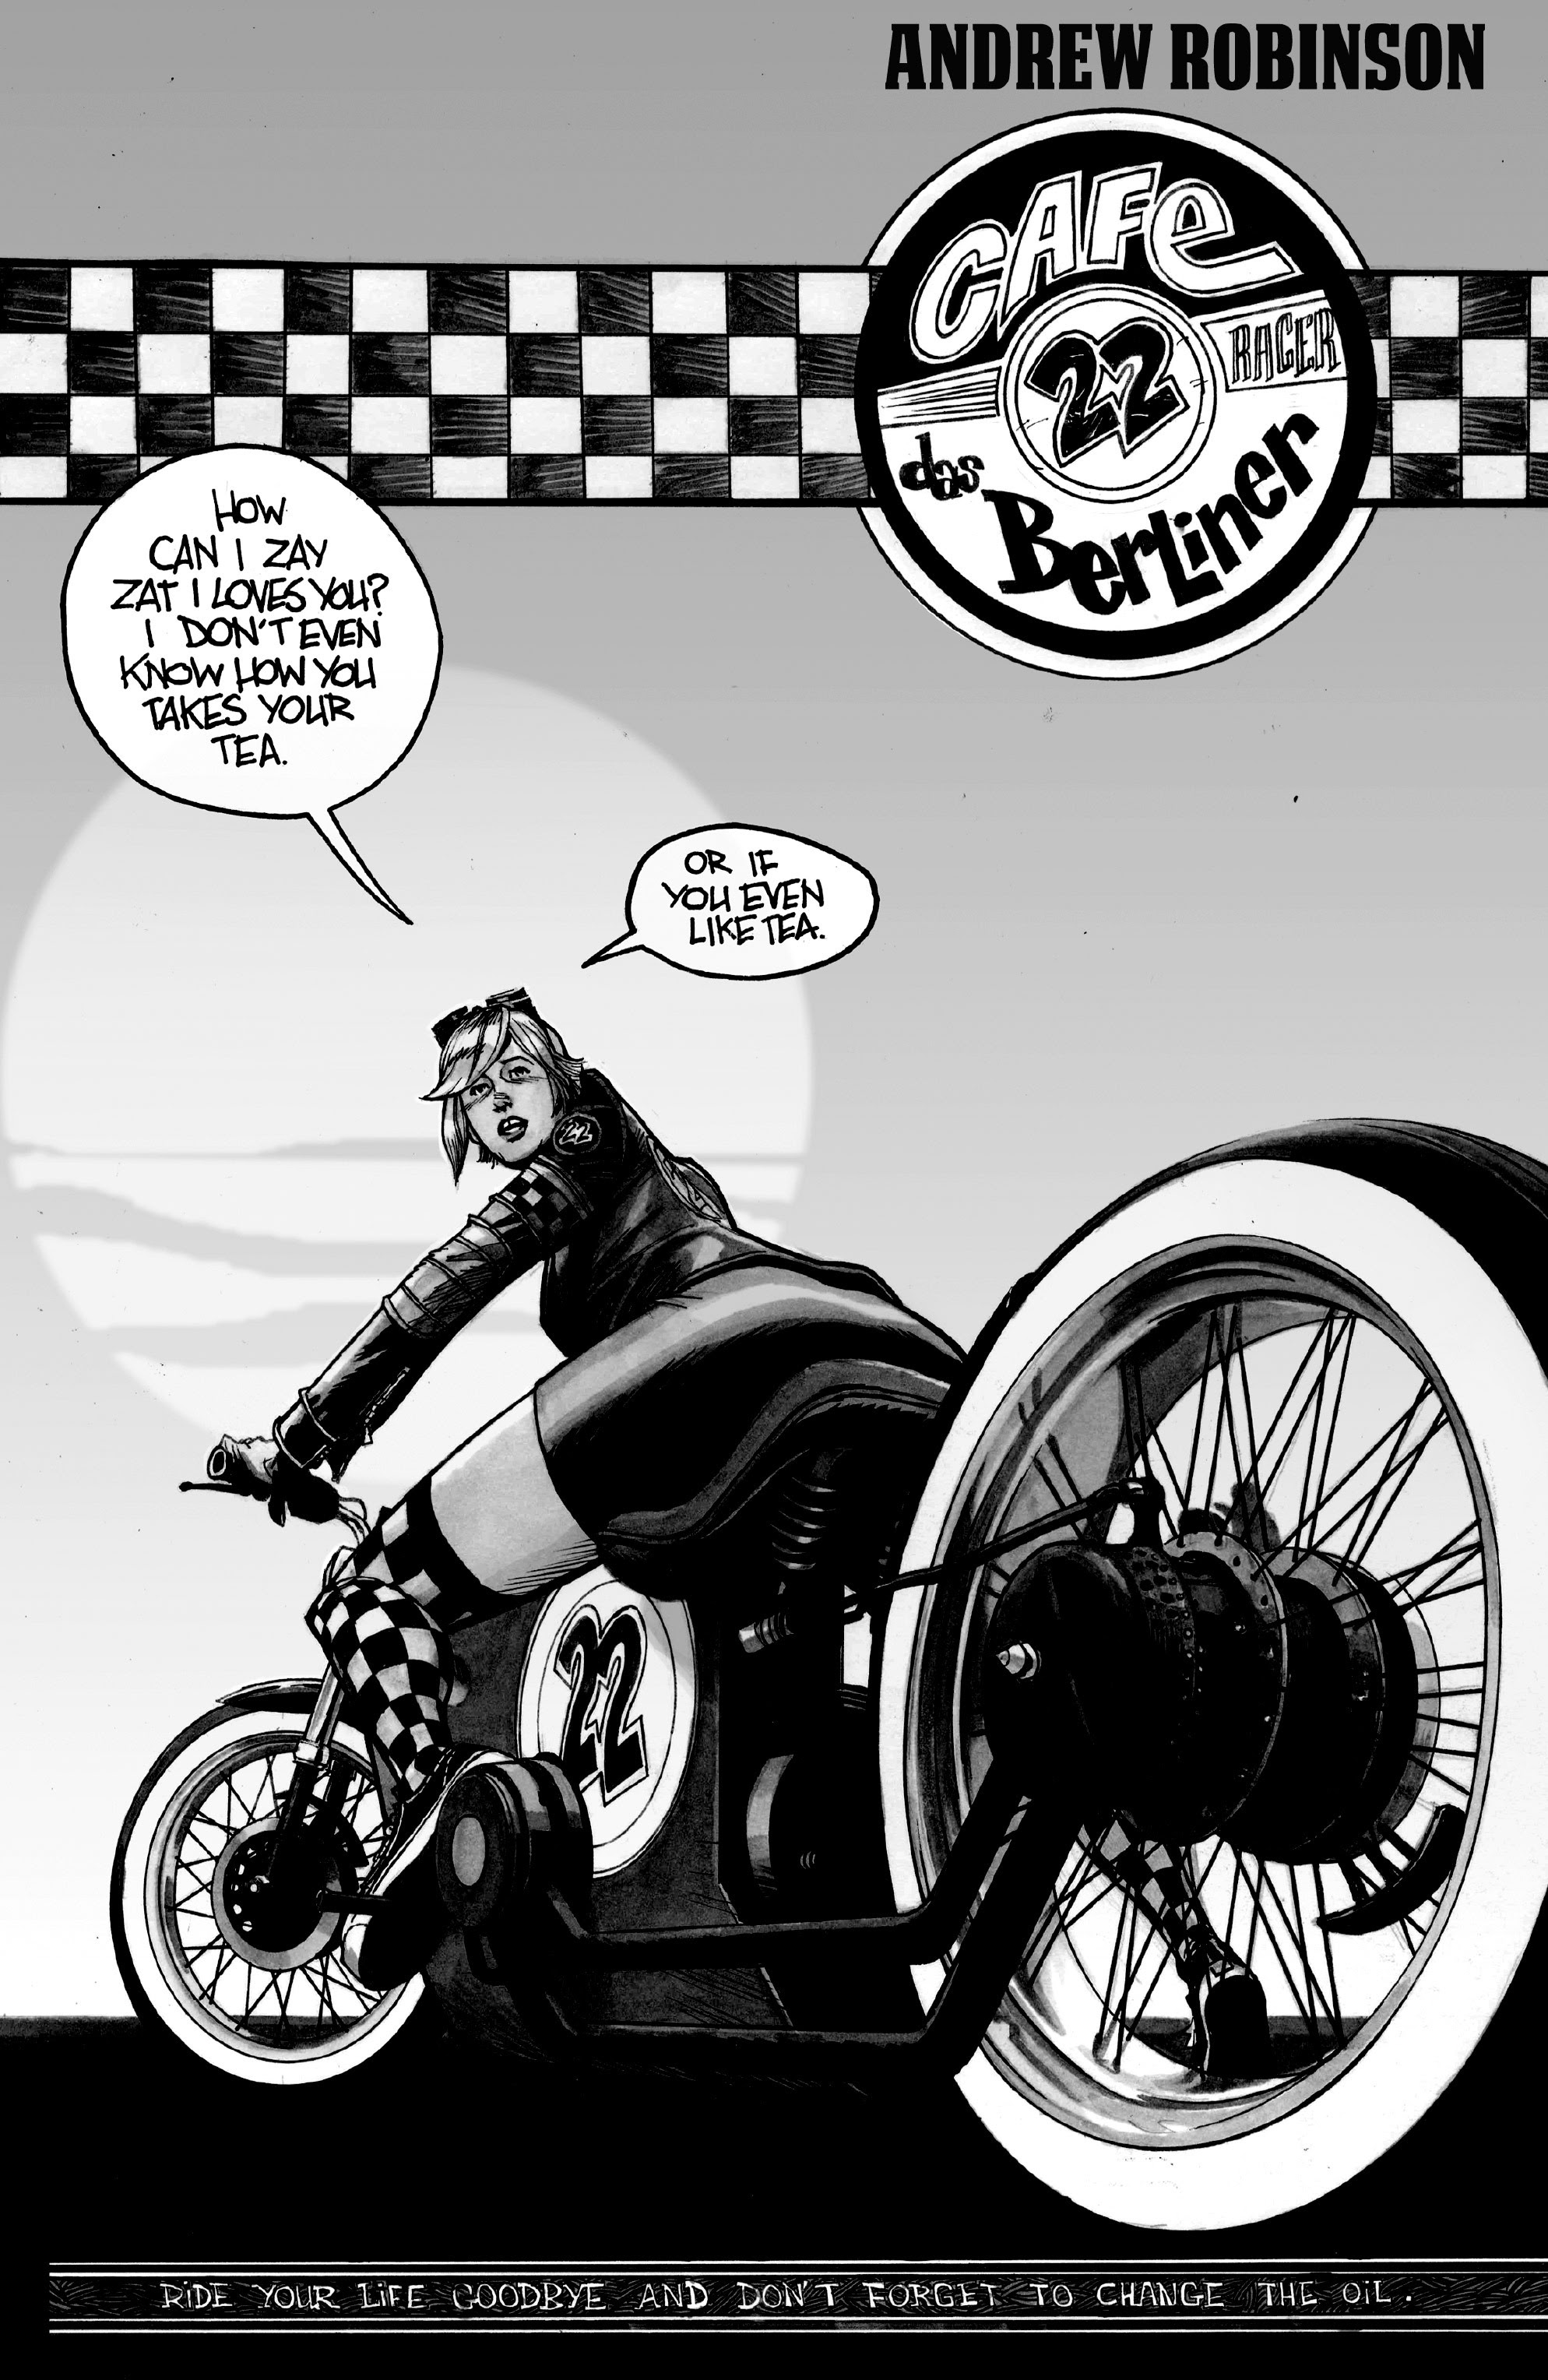 Read online Cafe Racer comic -  Issue # TPB - 92